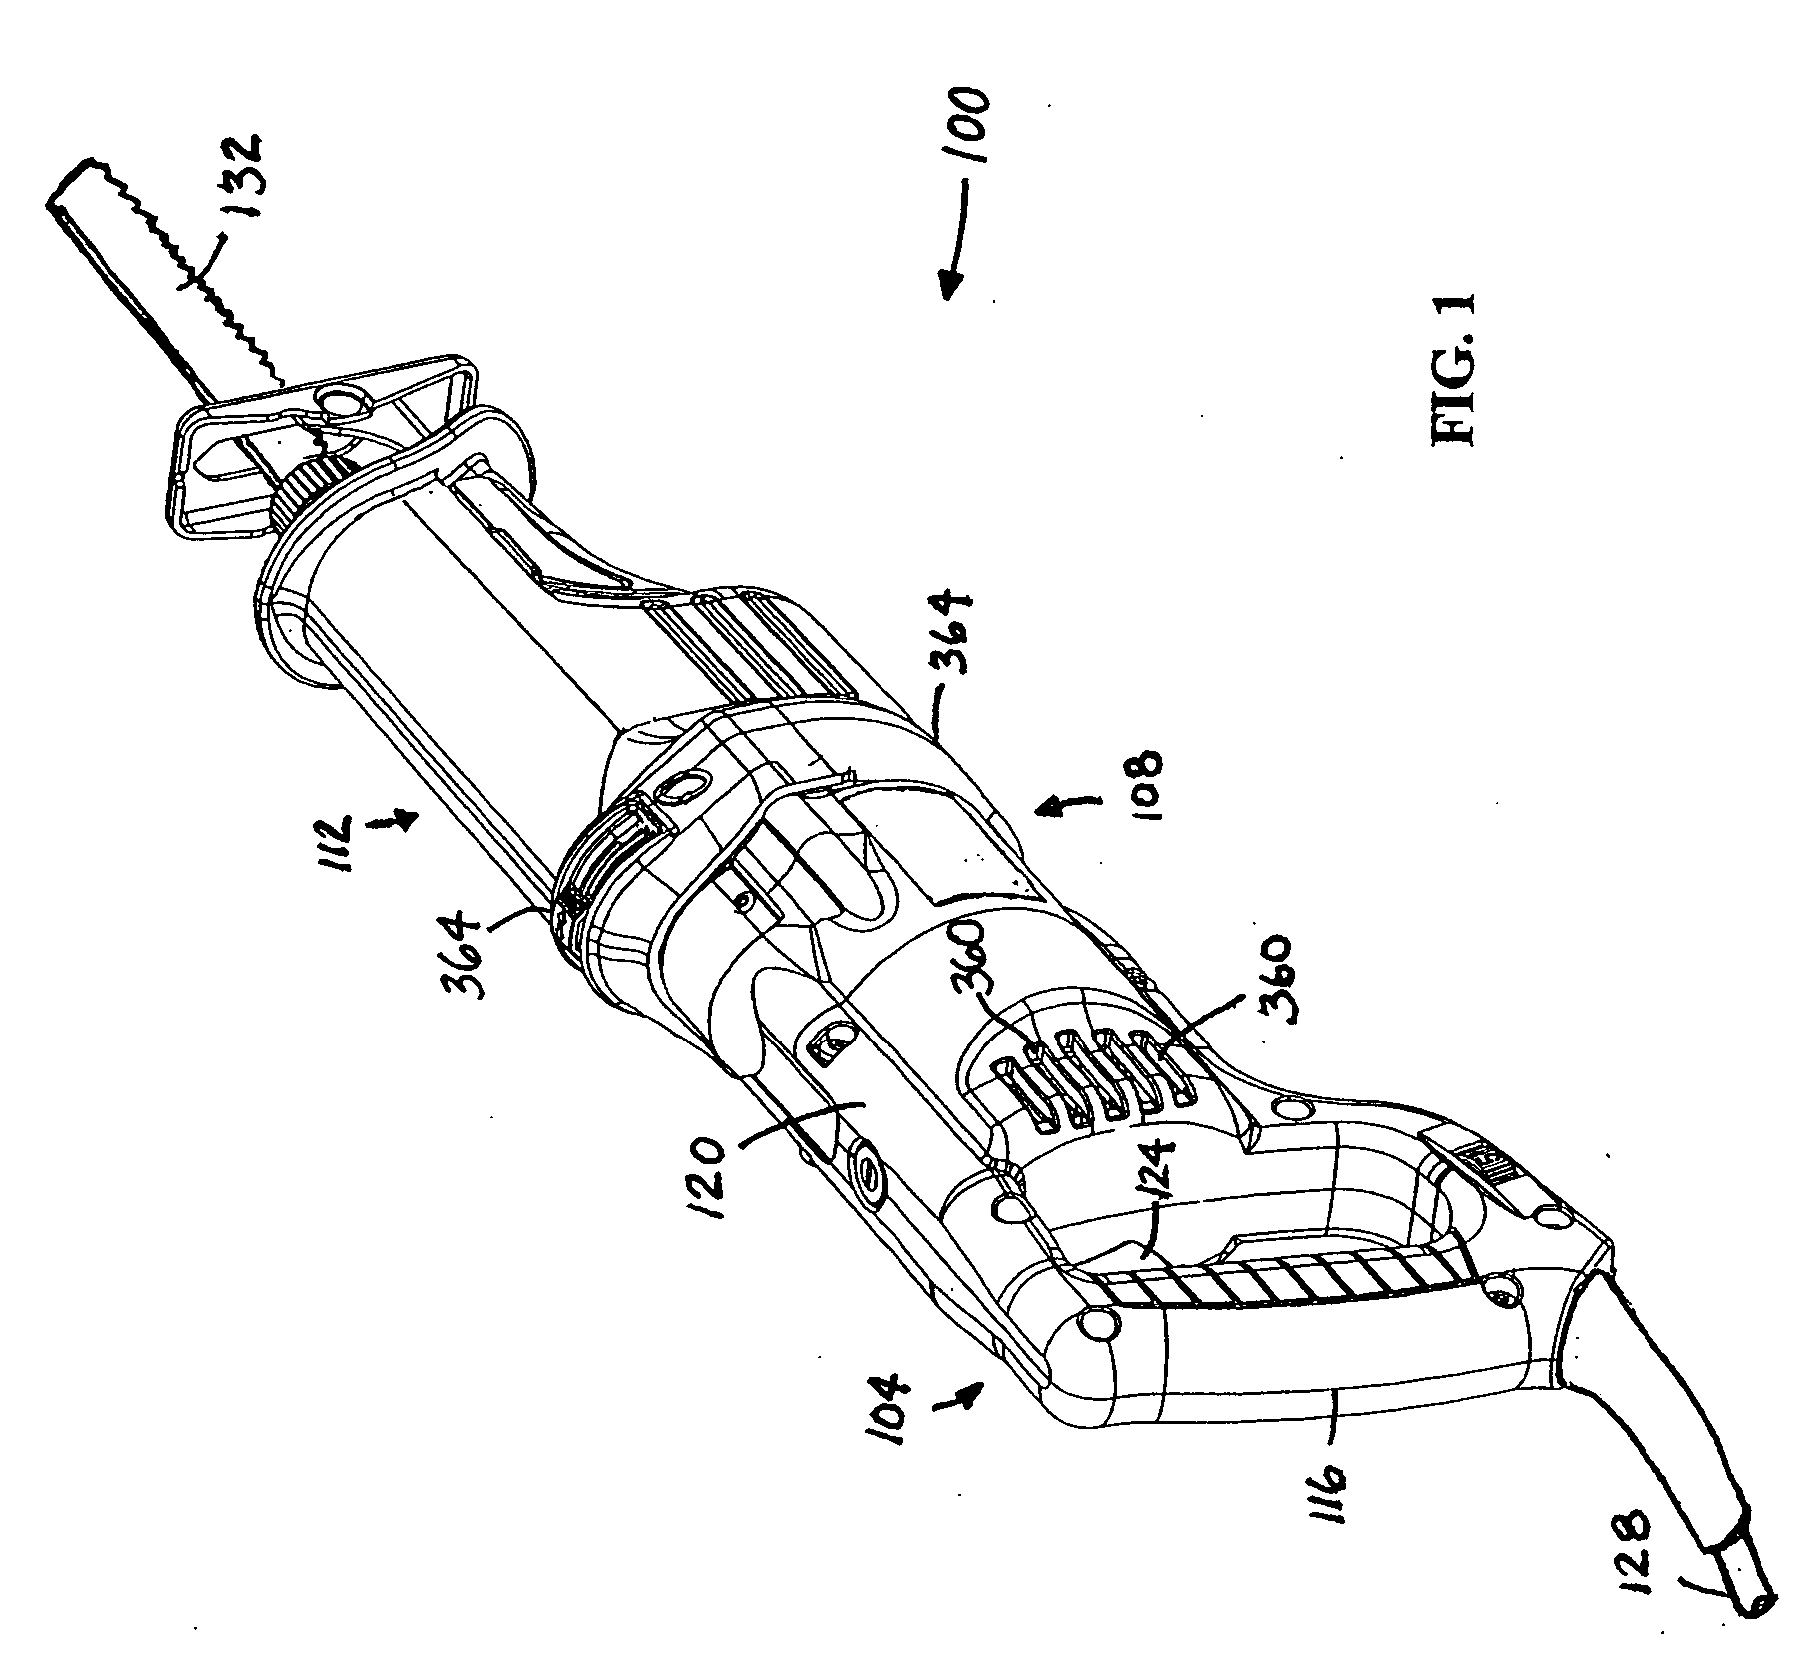 Power tools with switched reluctance motor